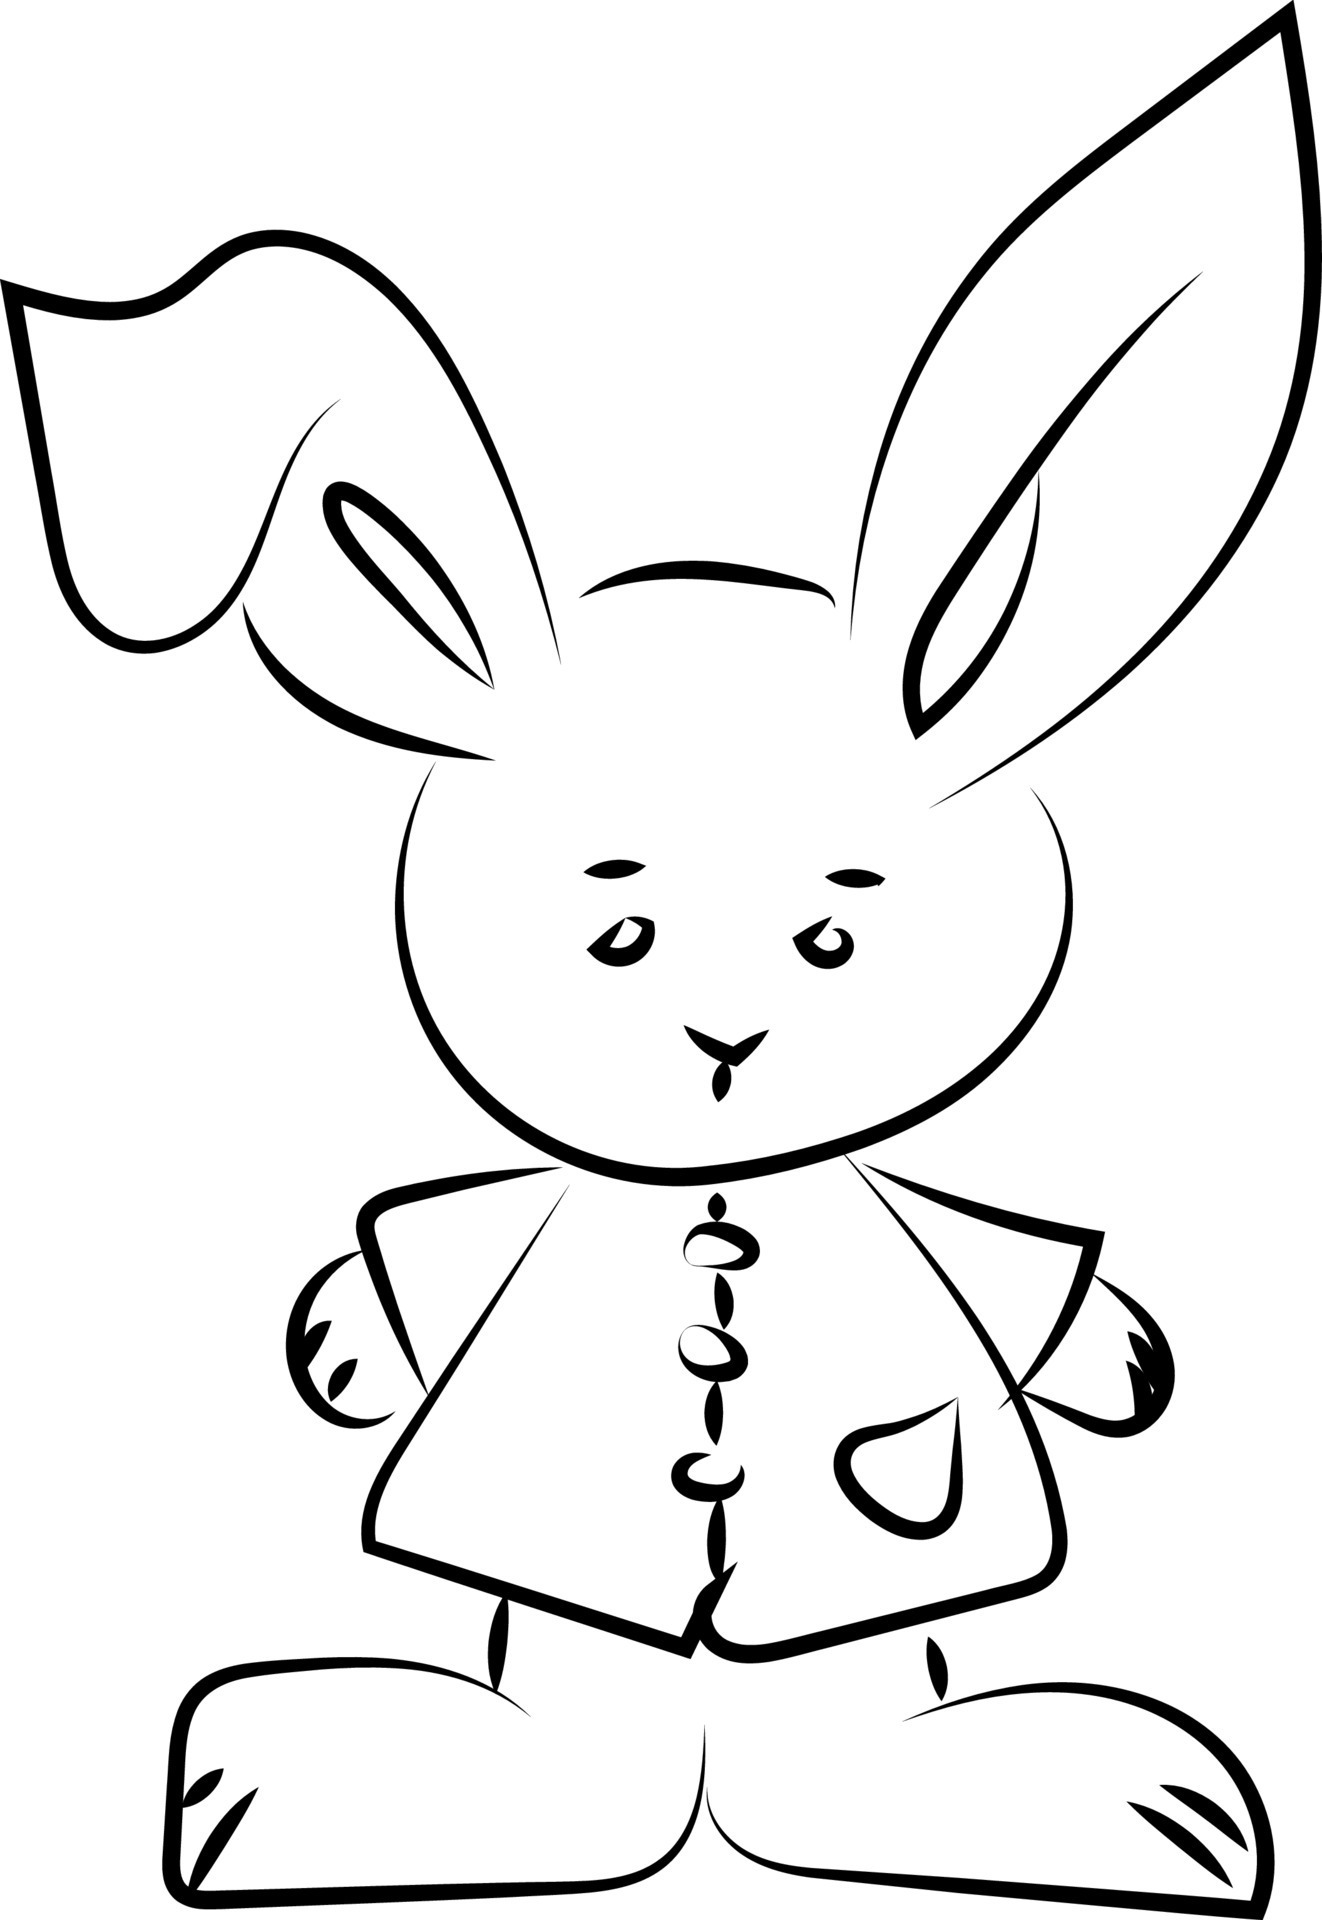 Bunny drawing, illustration, vector on white background. 13729428 ...